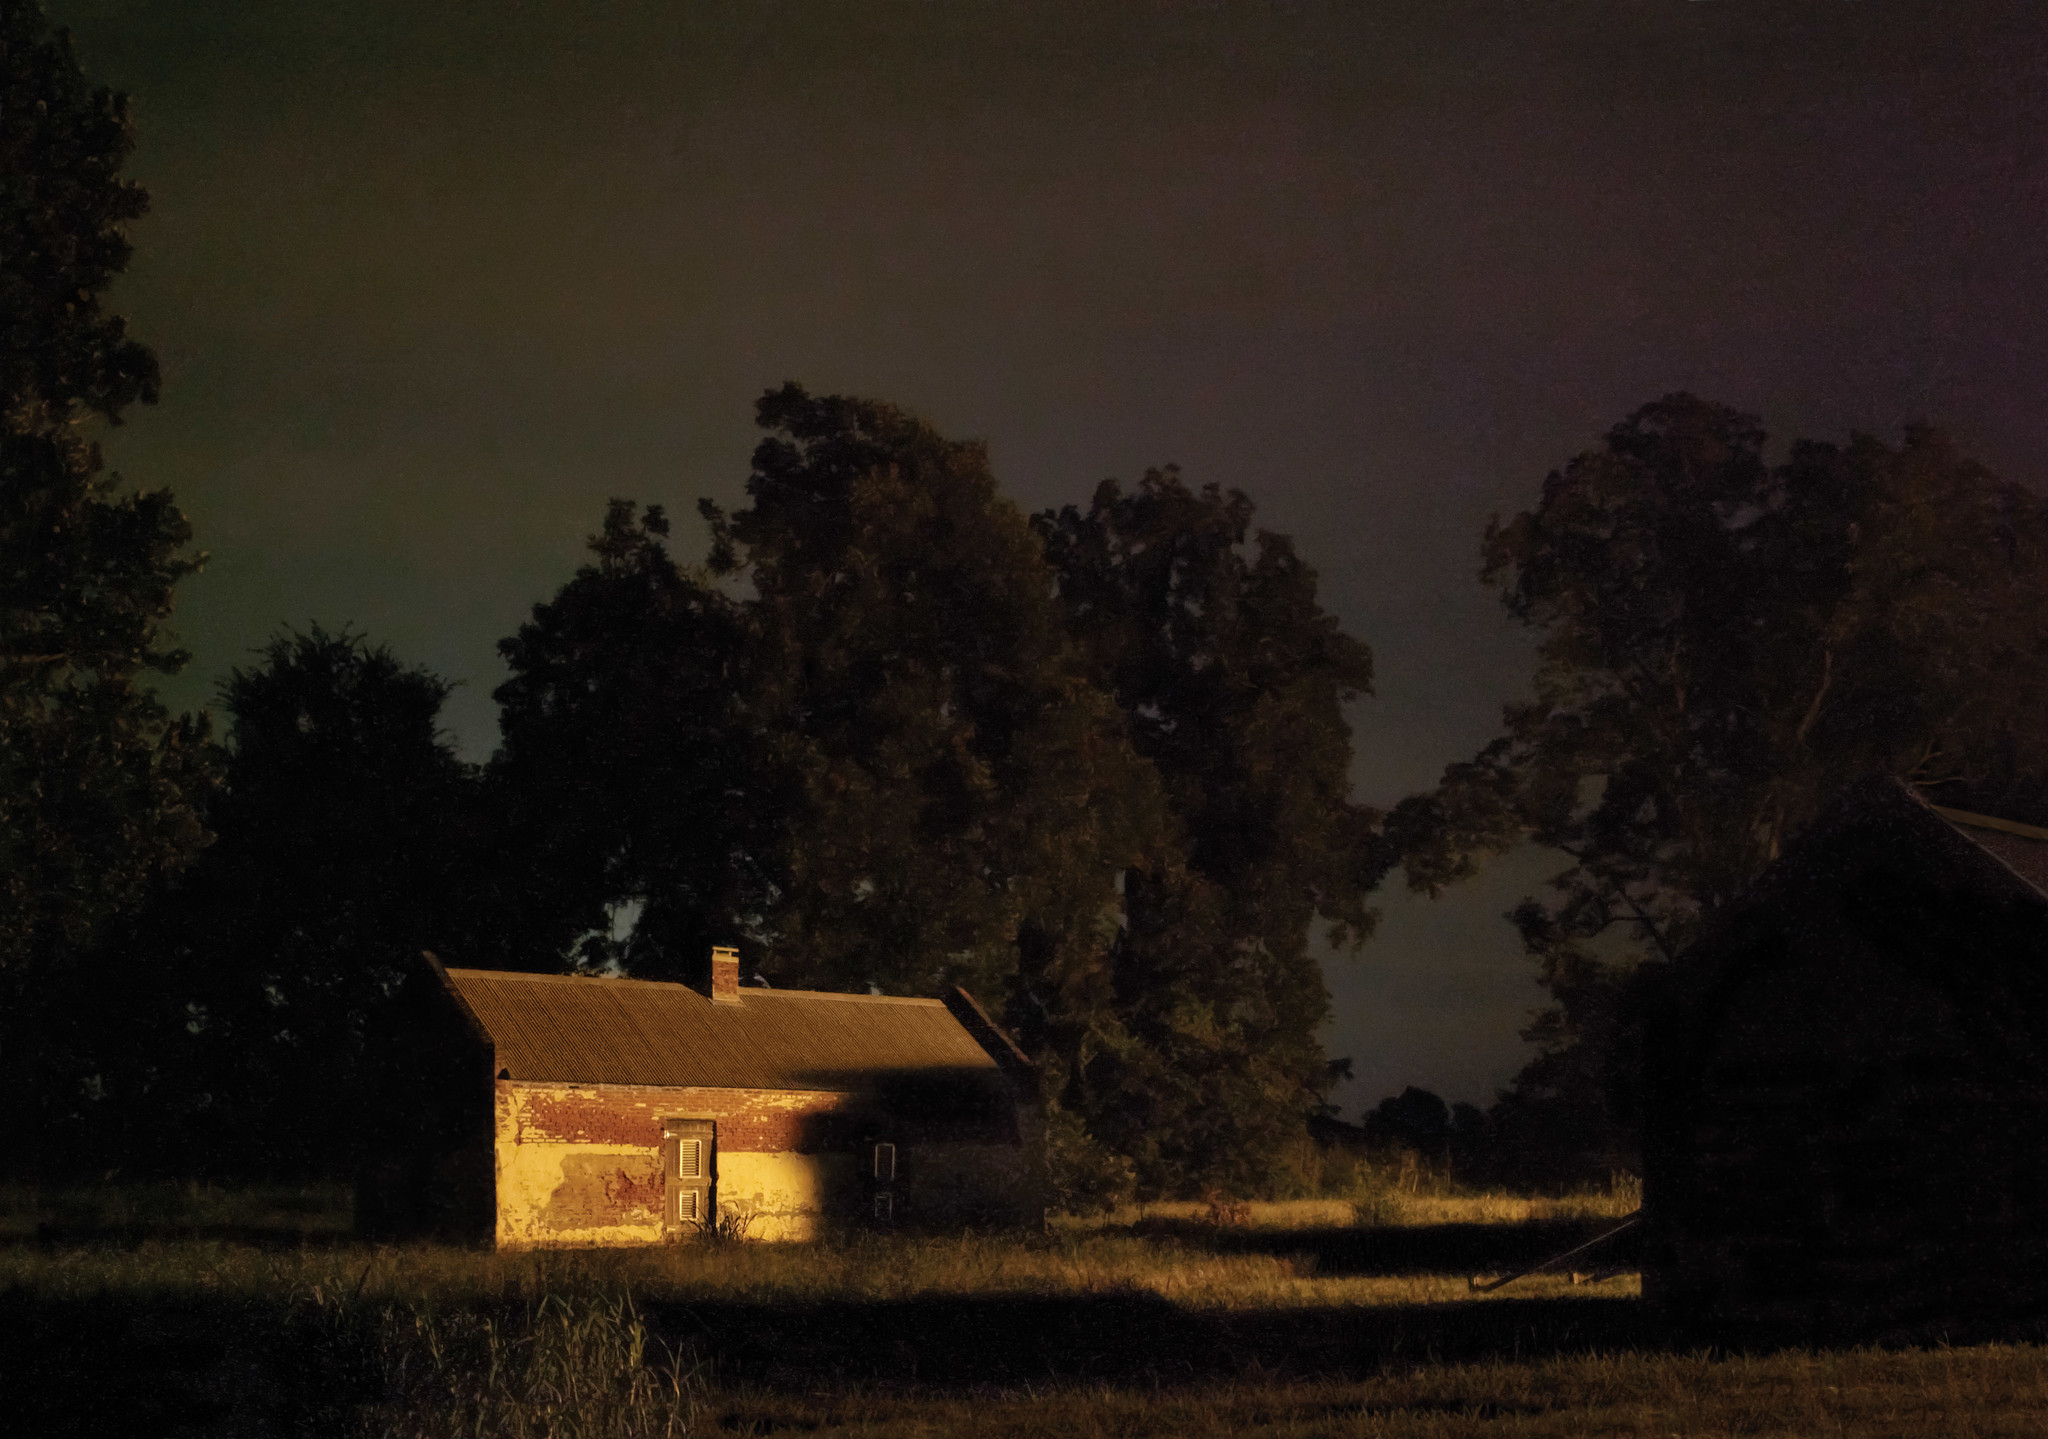 "Magnolia Plantation on the Cane River, Louisiana," 2013, from "In Through Darkness to Light: Photographs Along the Underground Railroad."